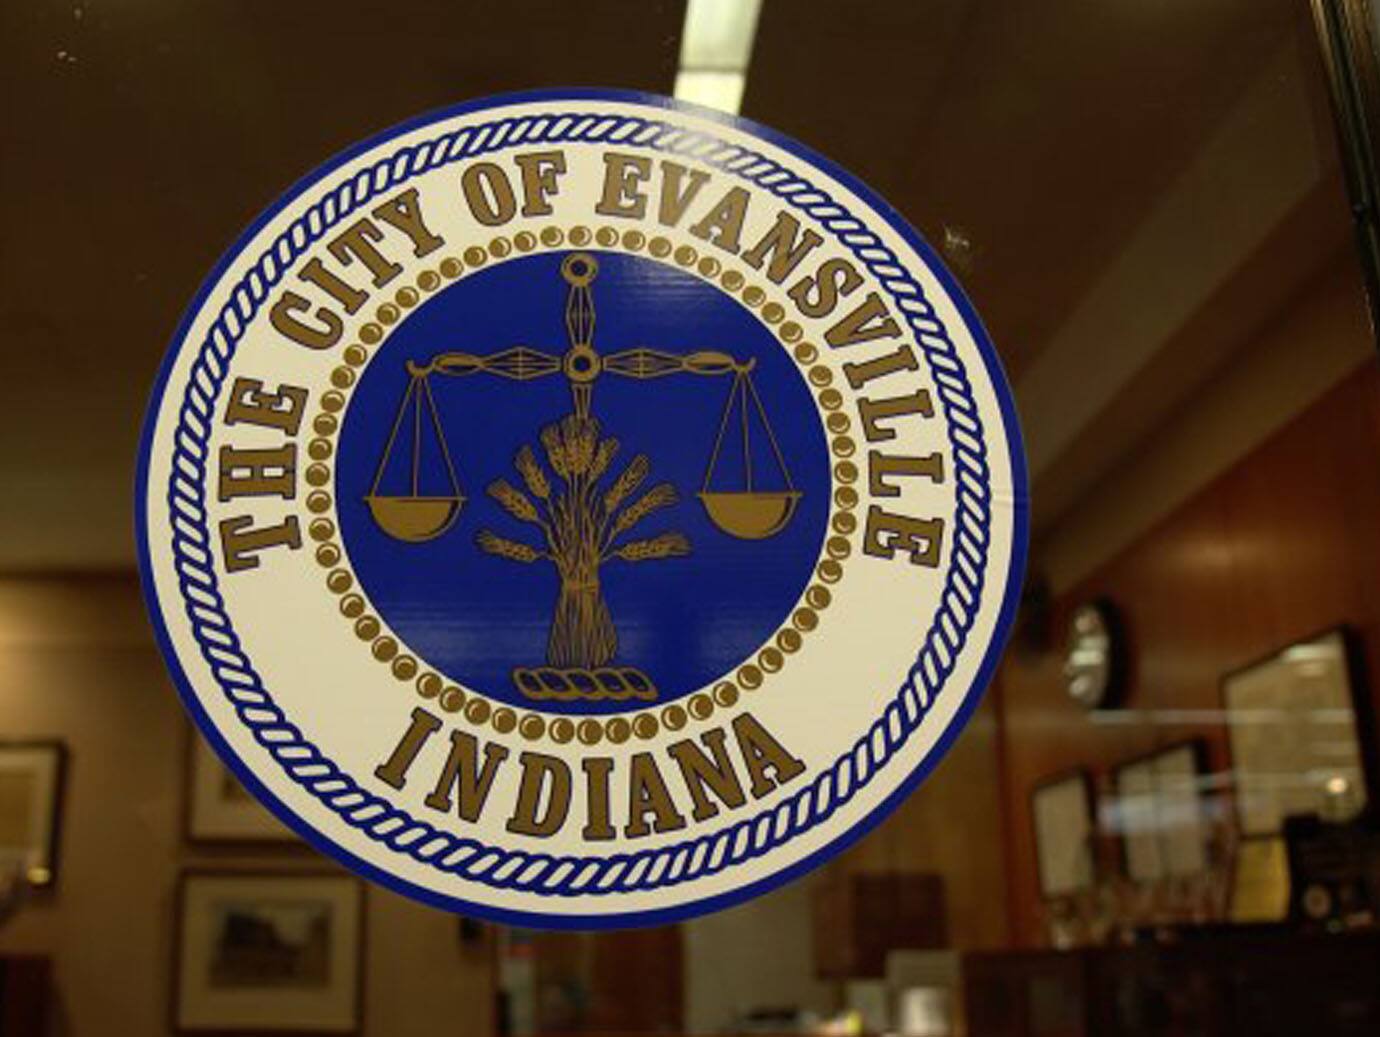 The city of Evansville logo